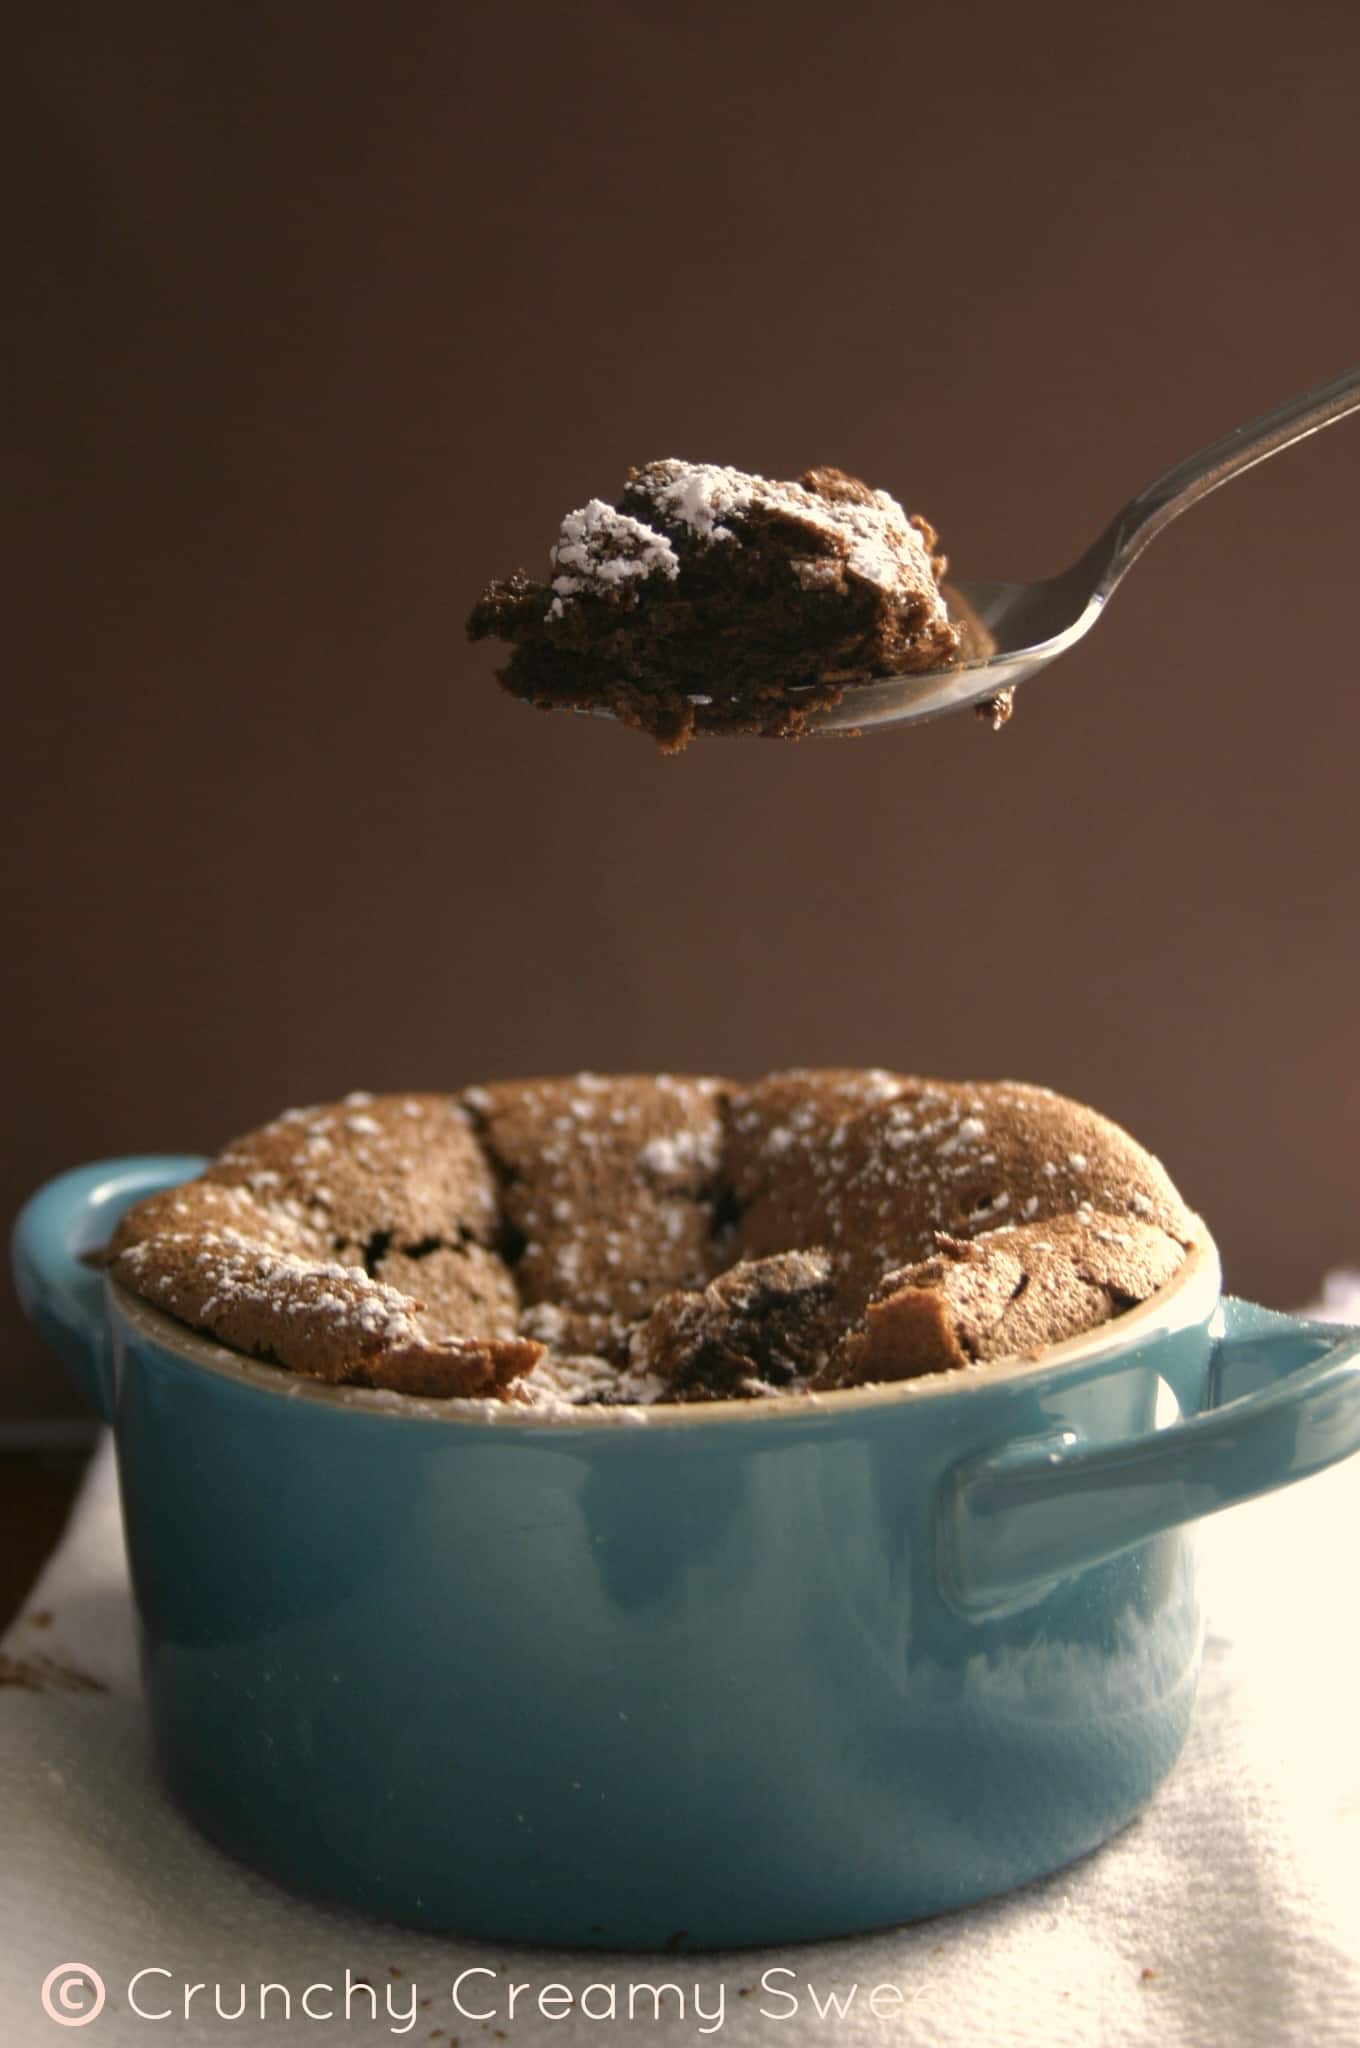  Chocolate Souffles - decadent dessert for the chocolate lovers. It's actually really easy to make and rich in flavor. 